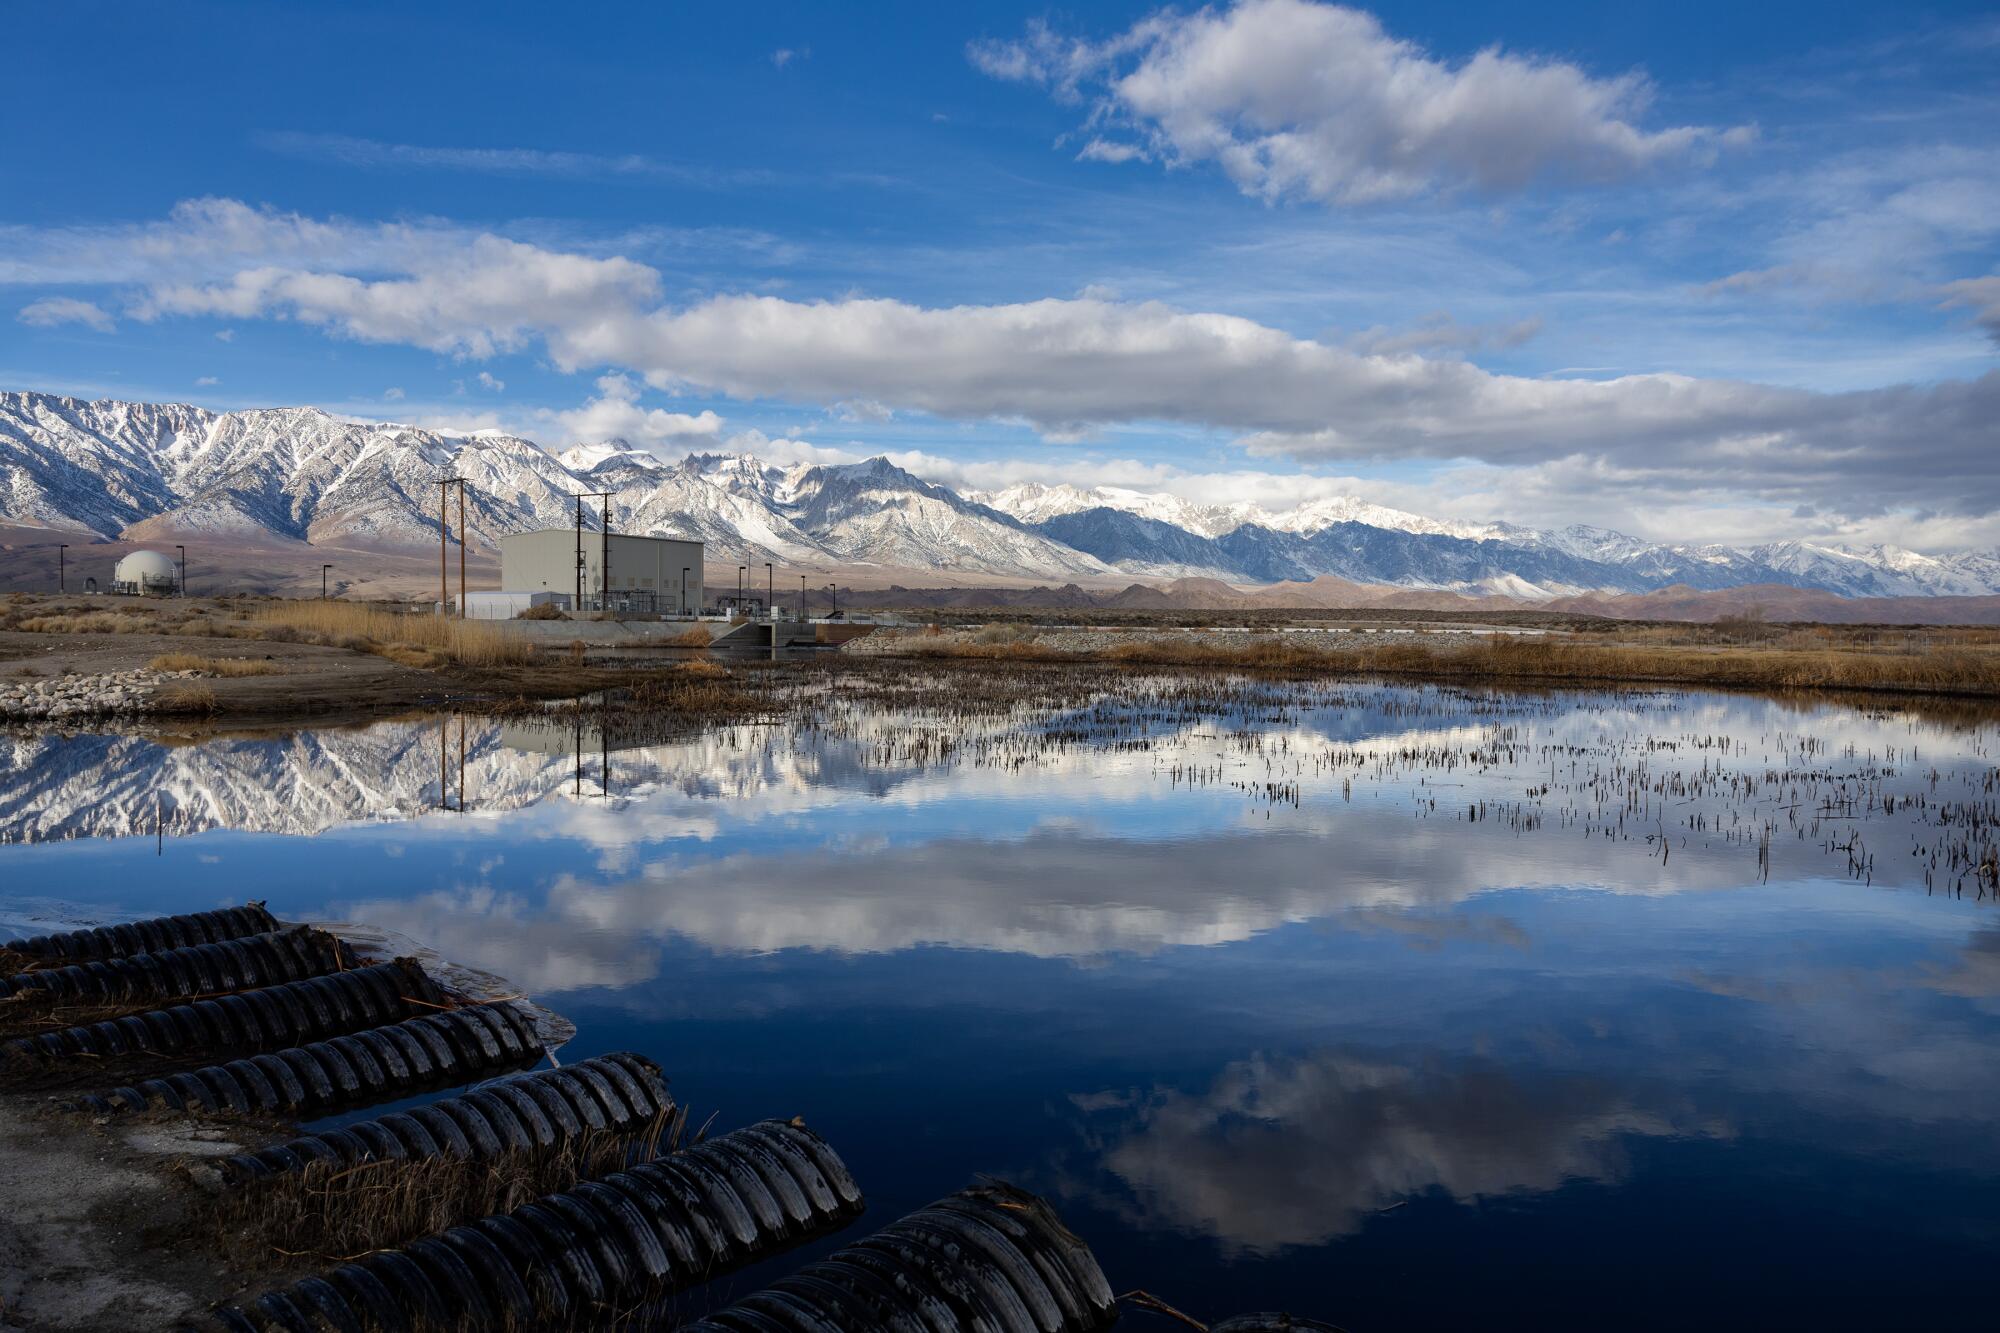 Clouds and the Sierra crest are reflected in the Owens River at the LADWP Pumpback Station.